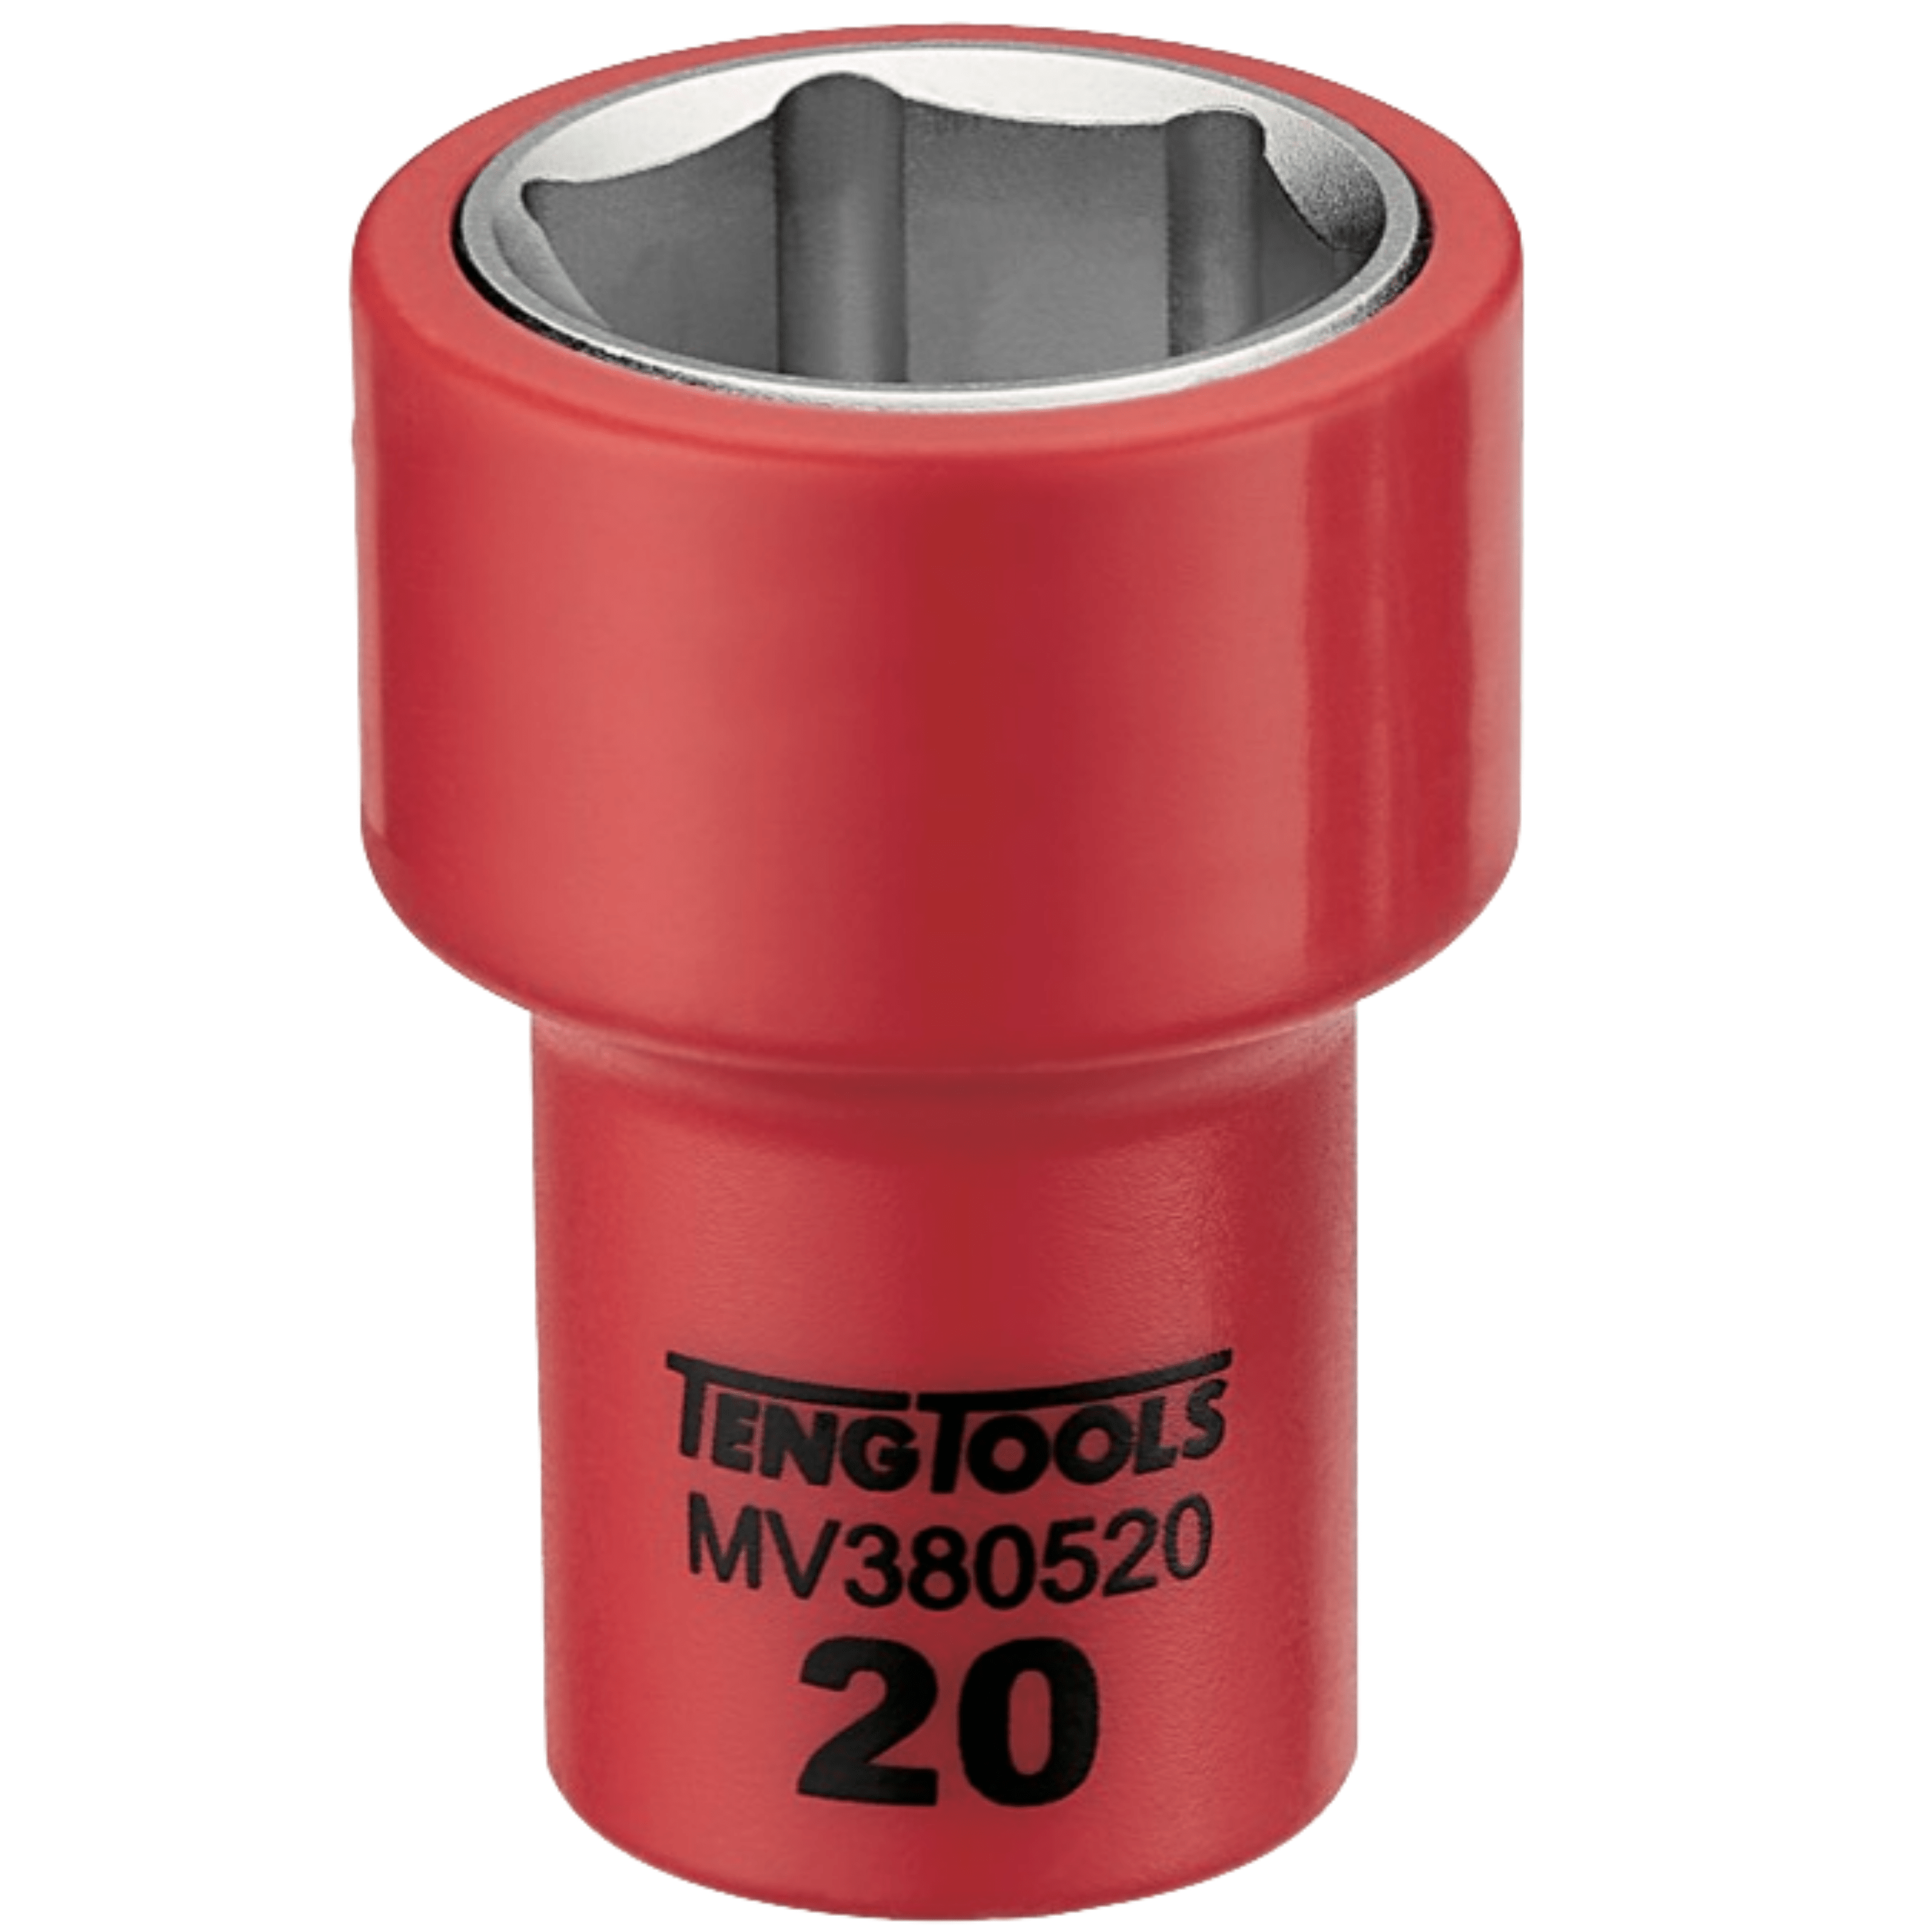 Teng Tools 3/8 Inch Drive Metric 6 Point 1000 Volt Shallow Insulated Sockets - 12mm